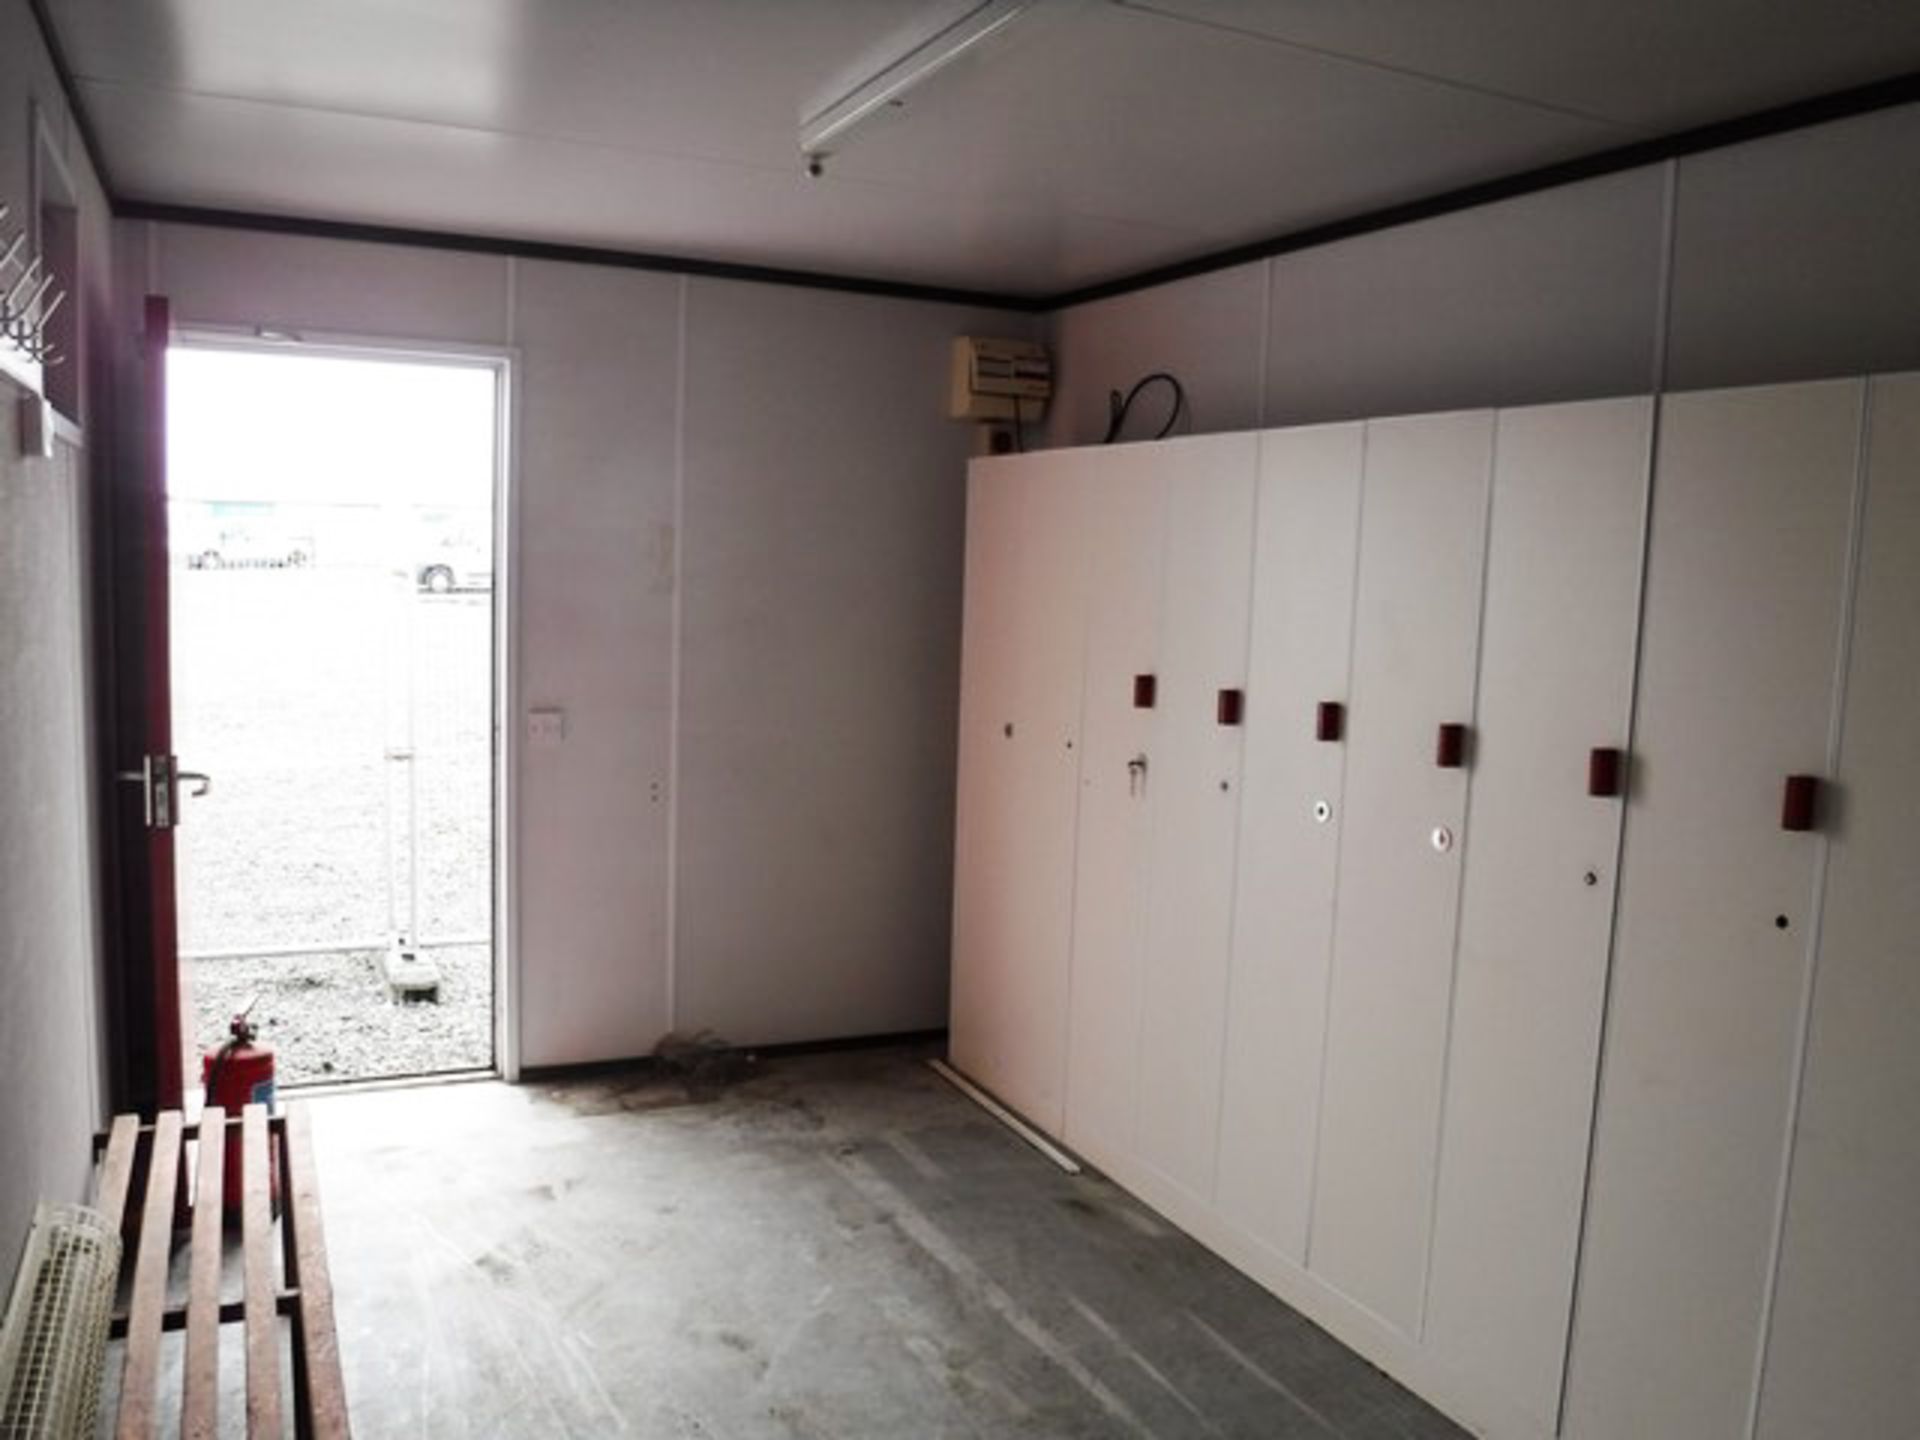 USED16ft x 9ft locker/drying cabin. No jacklegs - Image 5 of 6